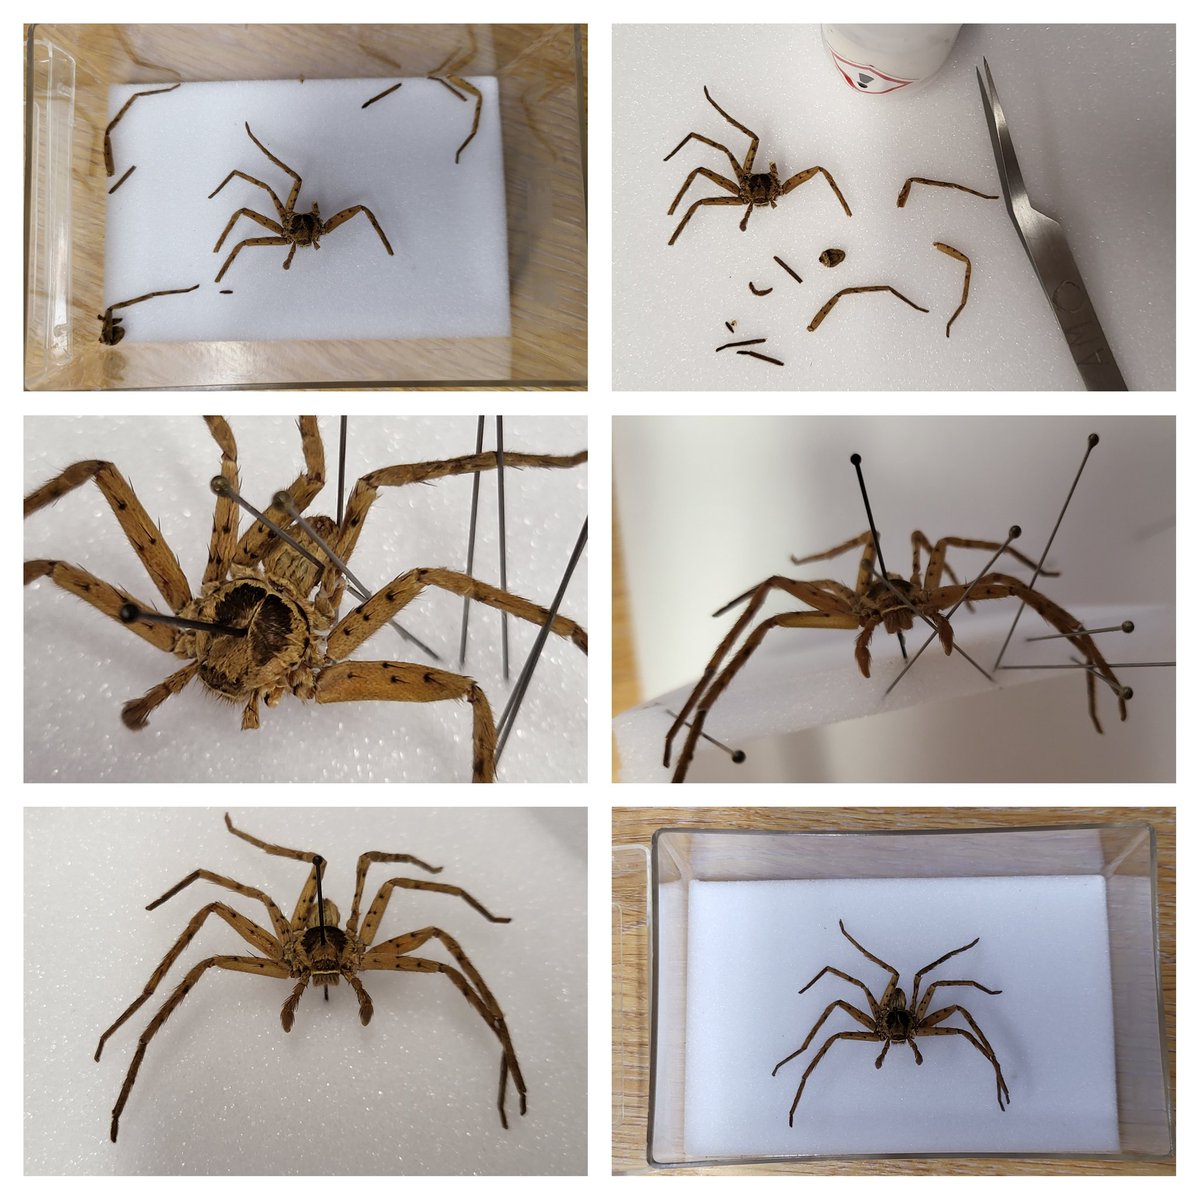 Here's a before, during, and after of a spider from the education handling collection getting some much needed TLC 🕷😀